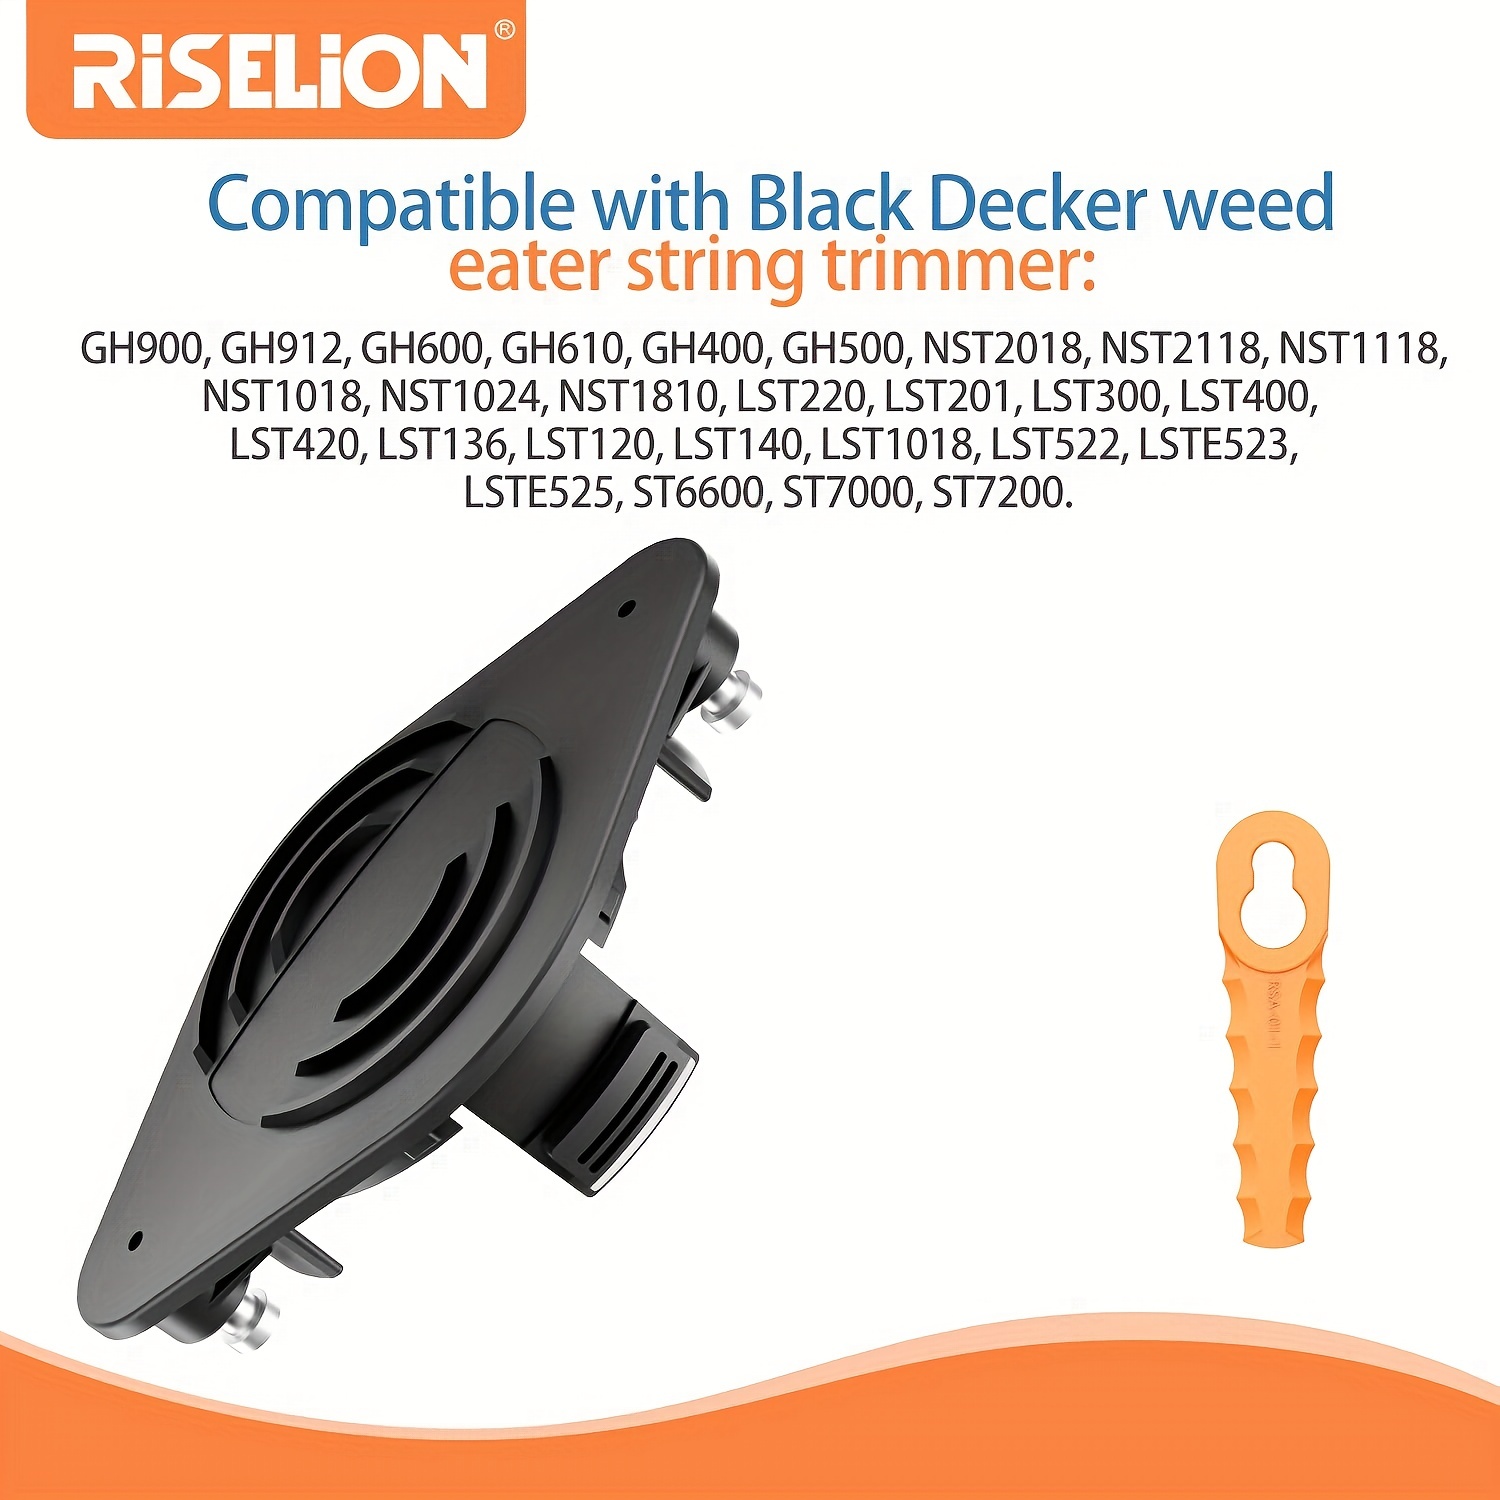 RISELION Weed Eater Bladed Head & SF-080-BKP Trimmer Spool Compatible with  Black Decker GH3000 LST540 LST540B GH3000R, ，SF-080 Replacement spools.(1